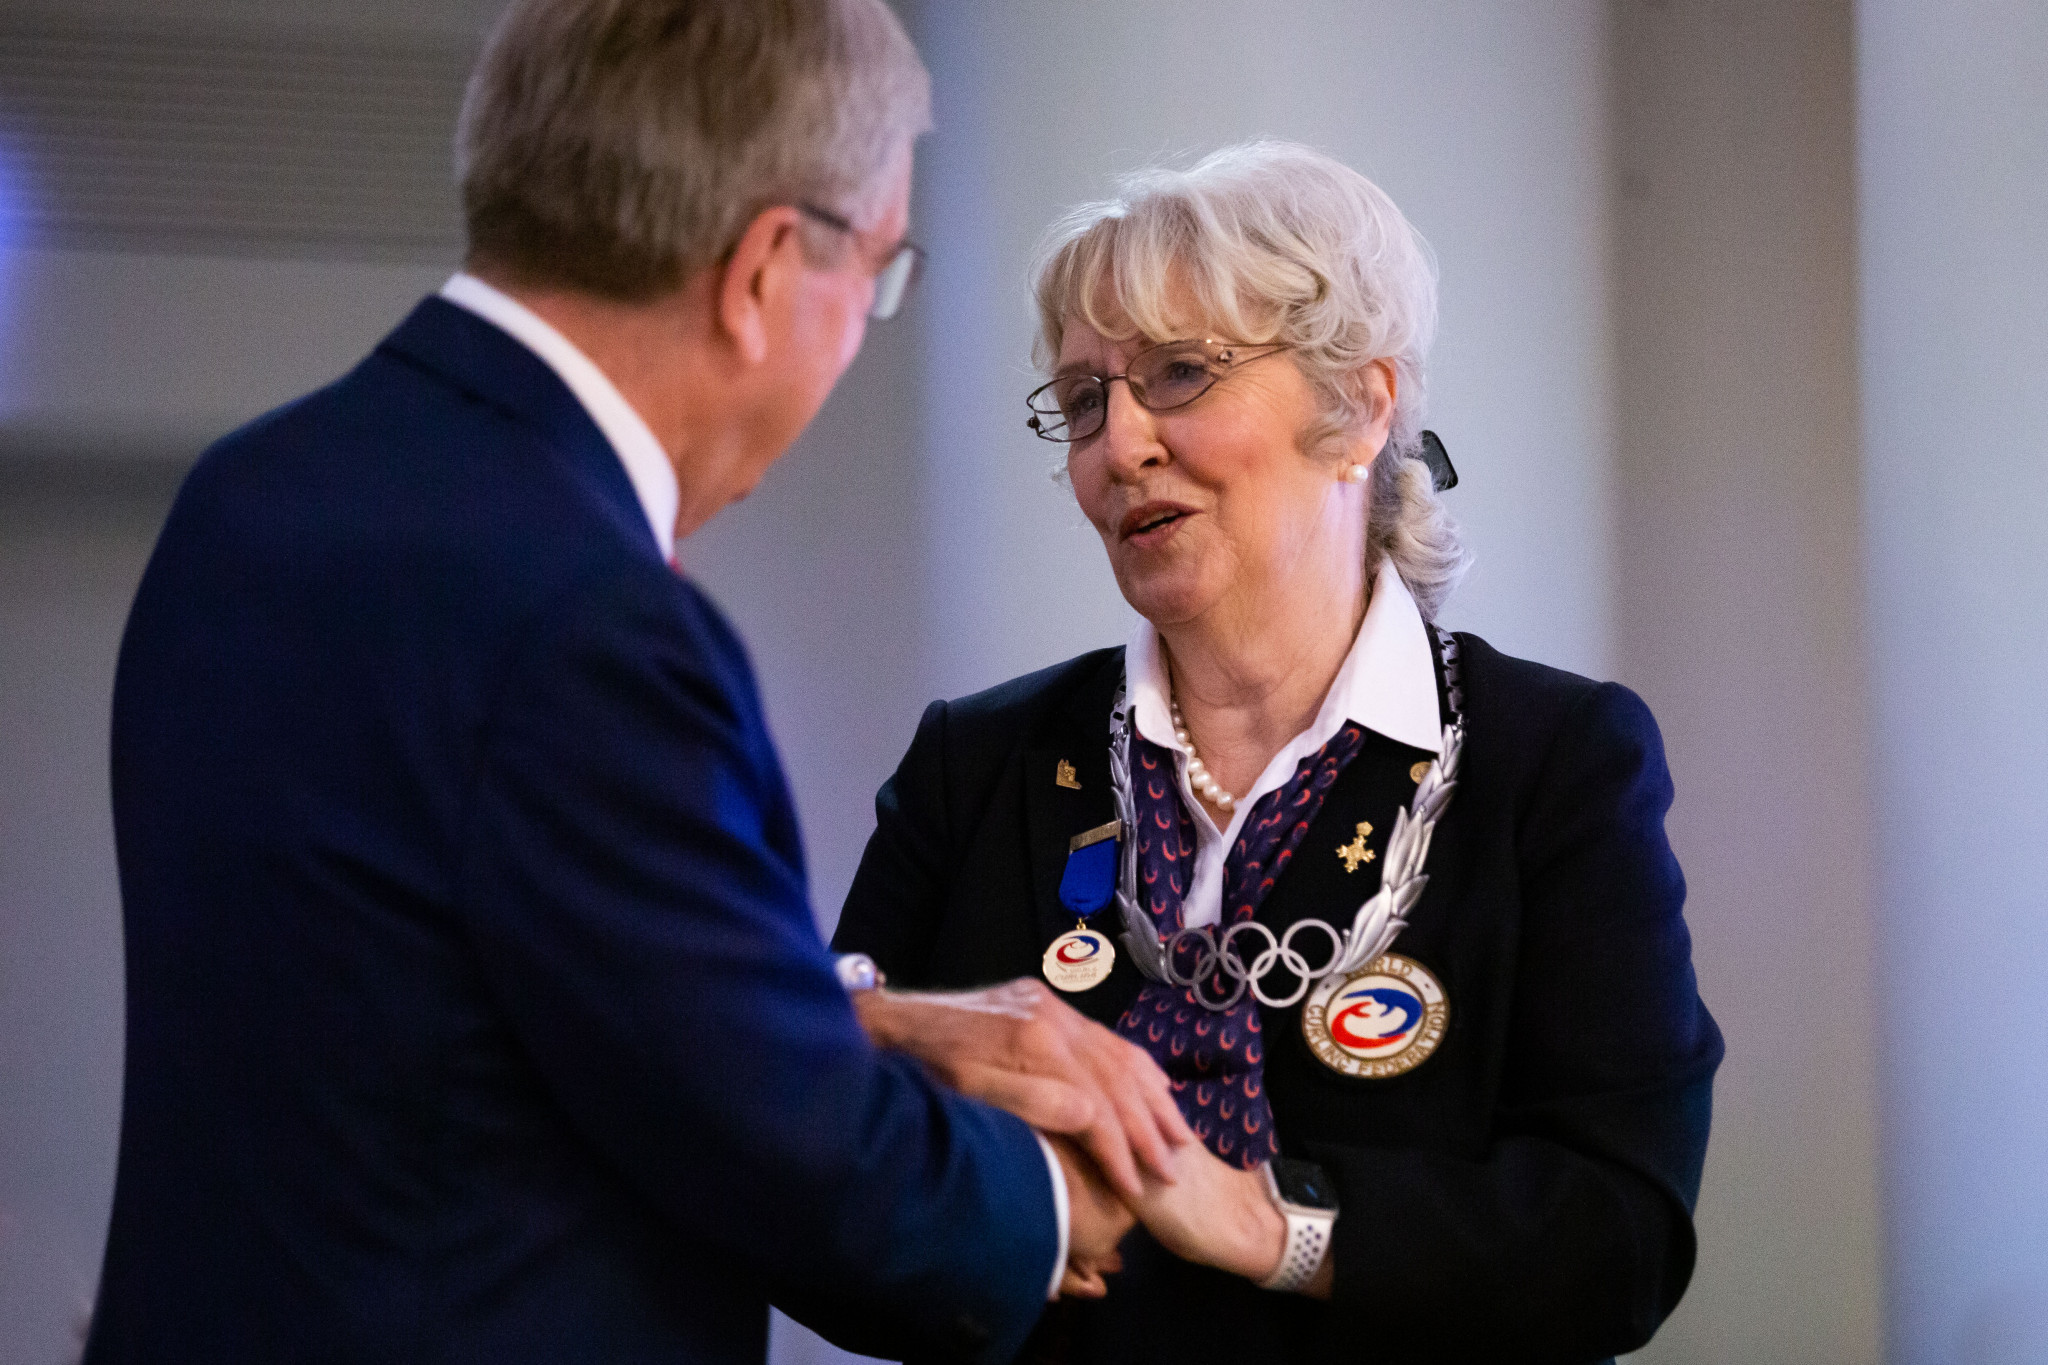 IOC President Bach awards departing WCF head Caithness with Olympic Order